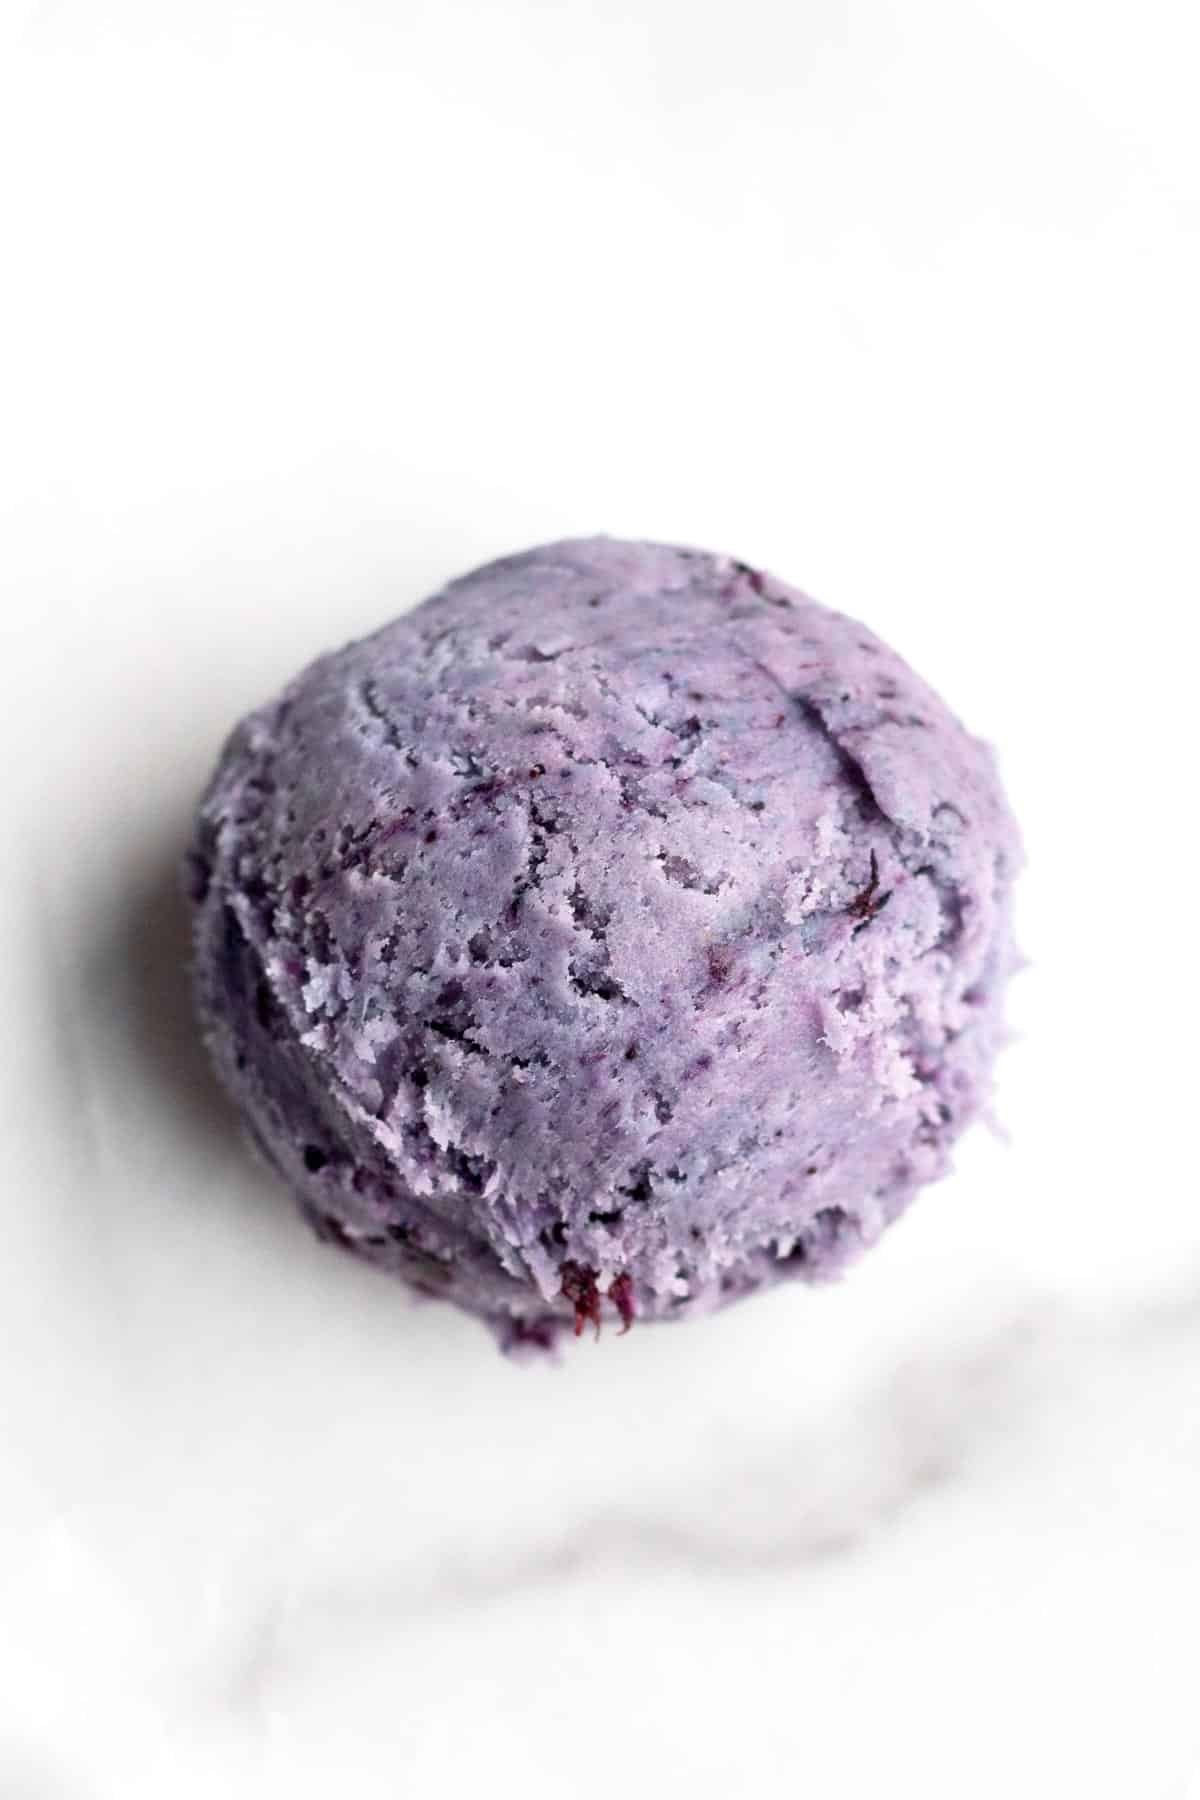 A purple scooped ball of cookie dough.